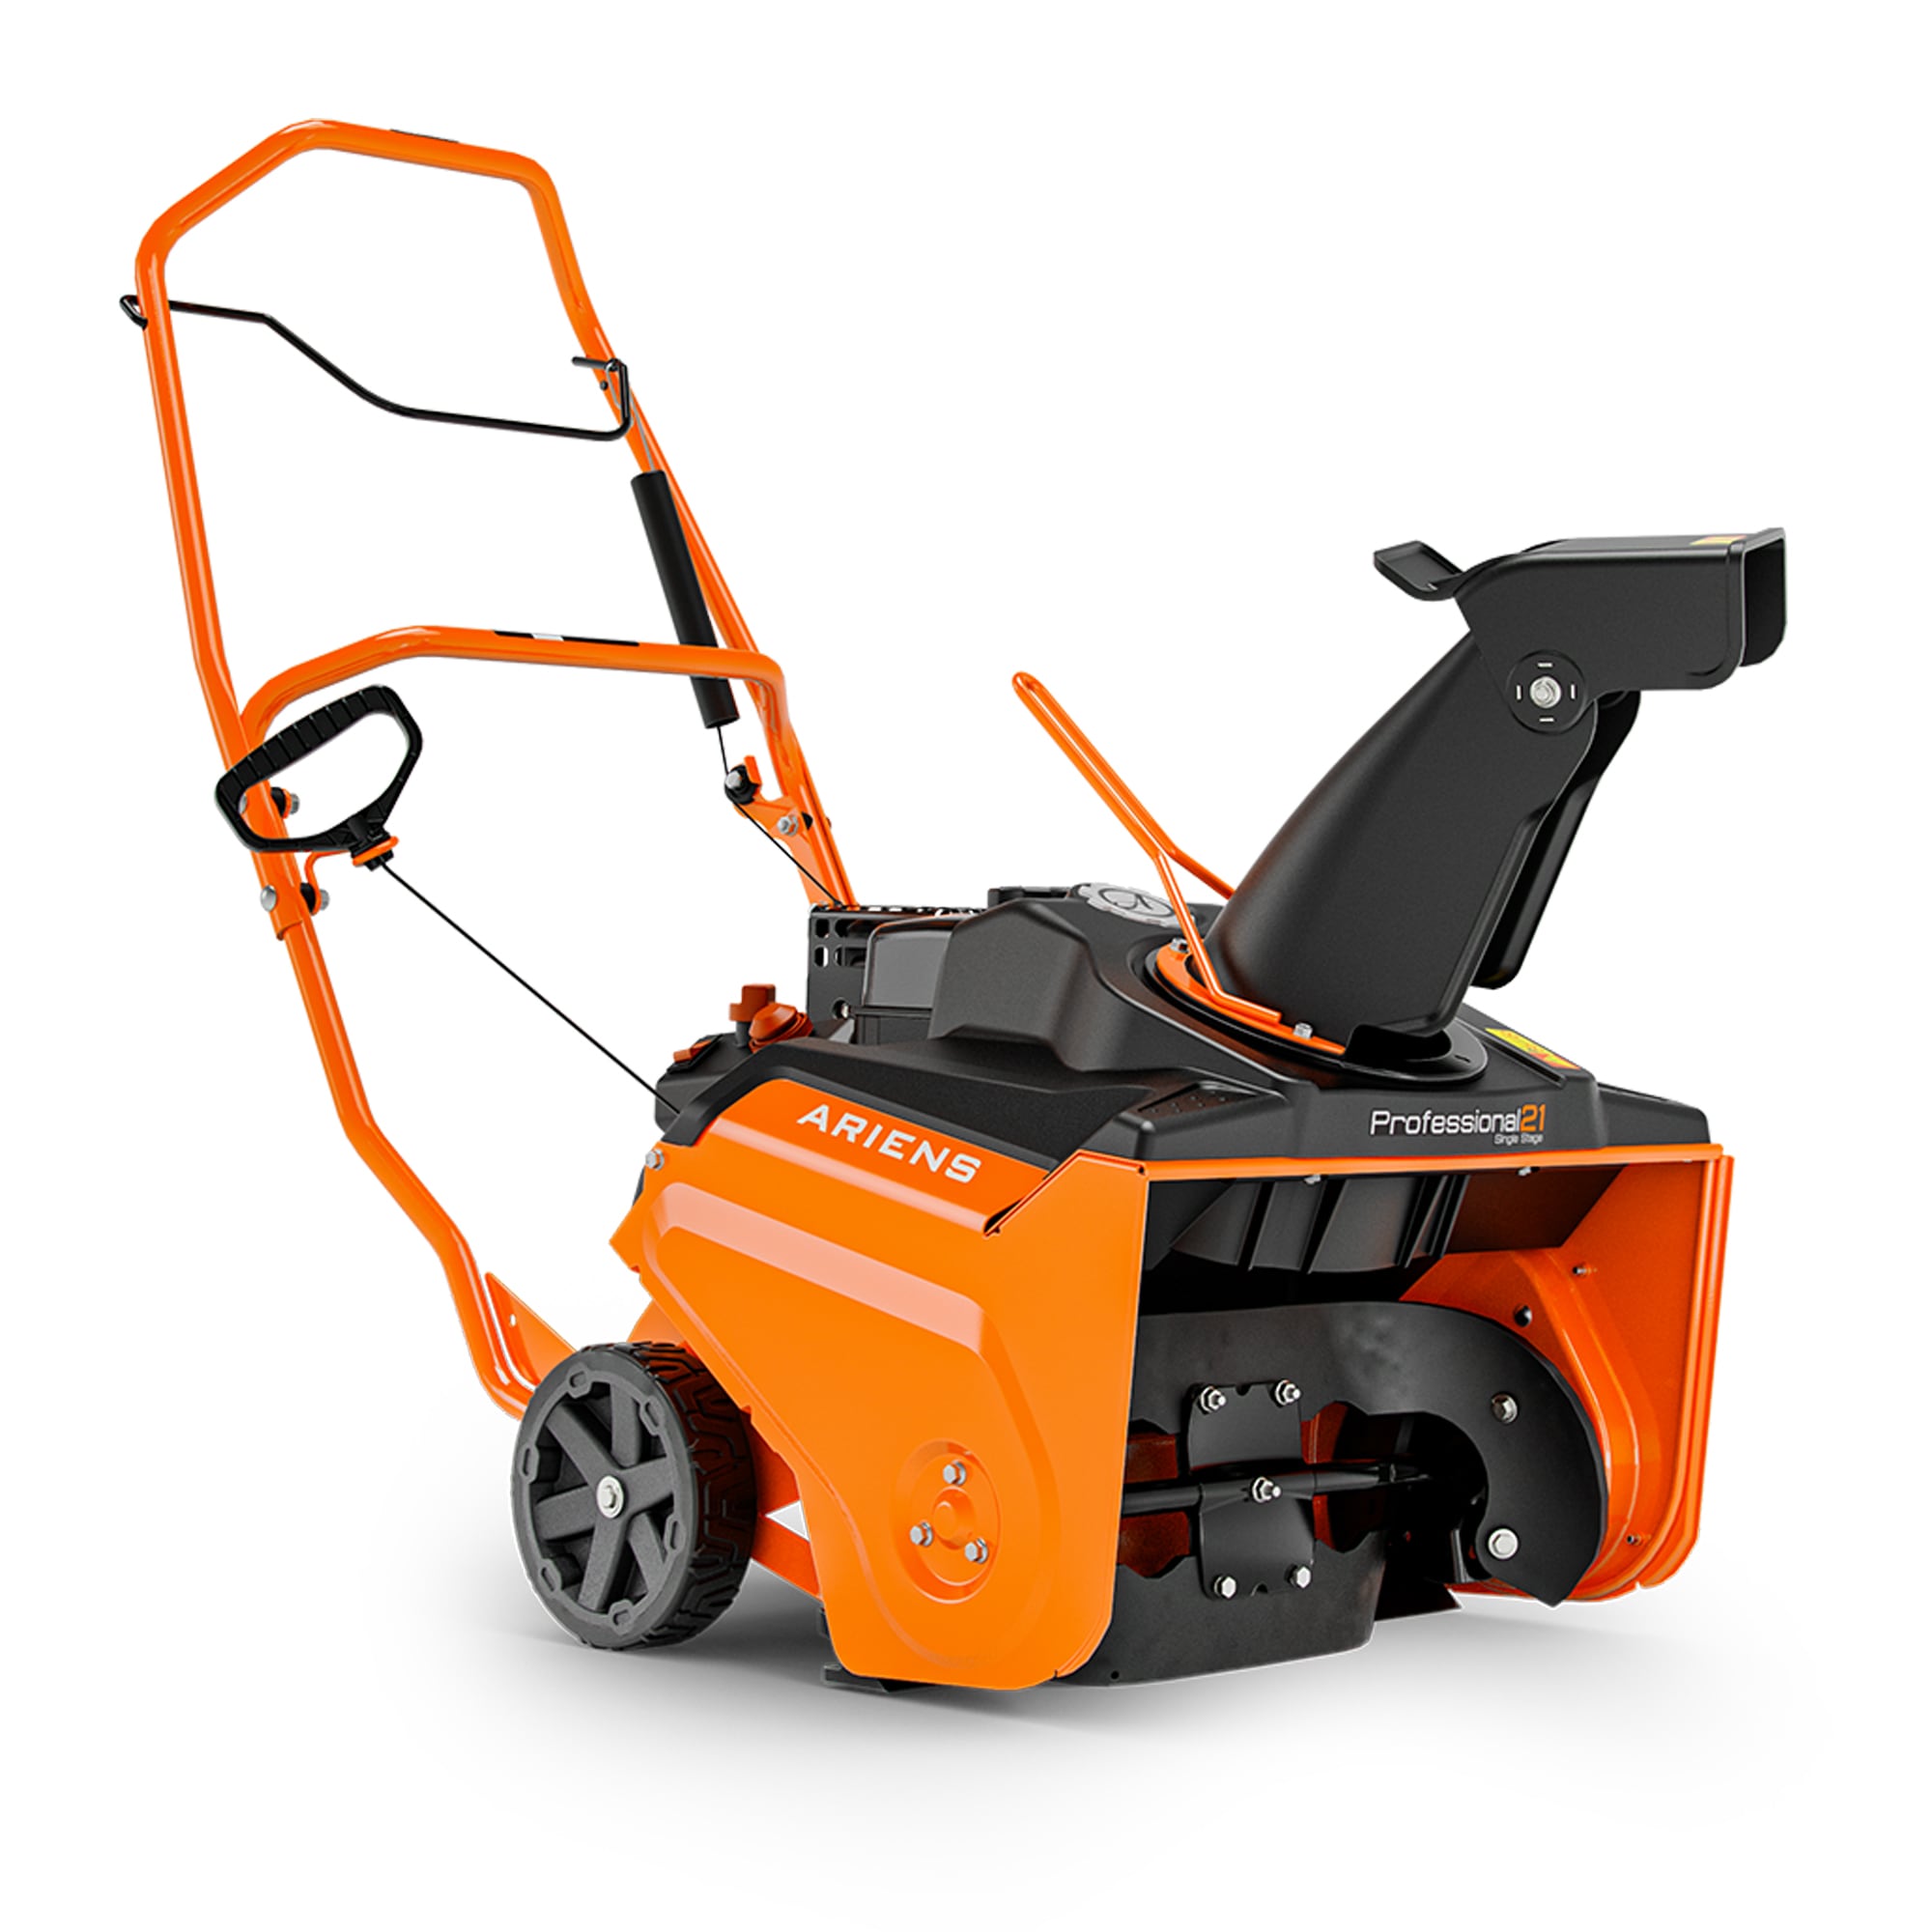 Ariens Professional single stage 21-in Single-stage Push with 